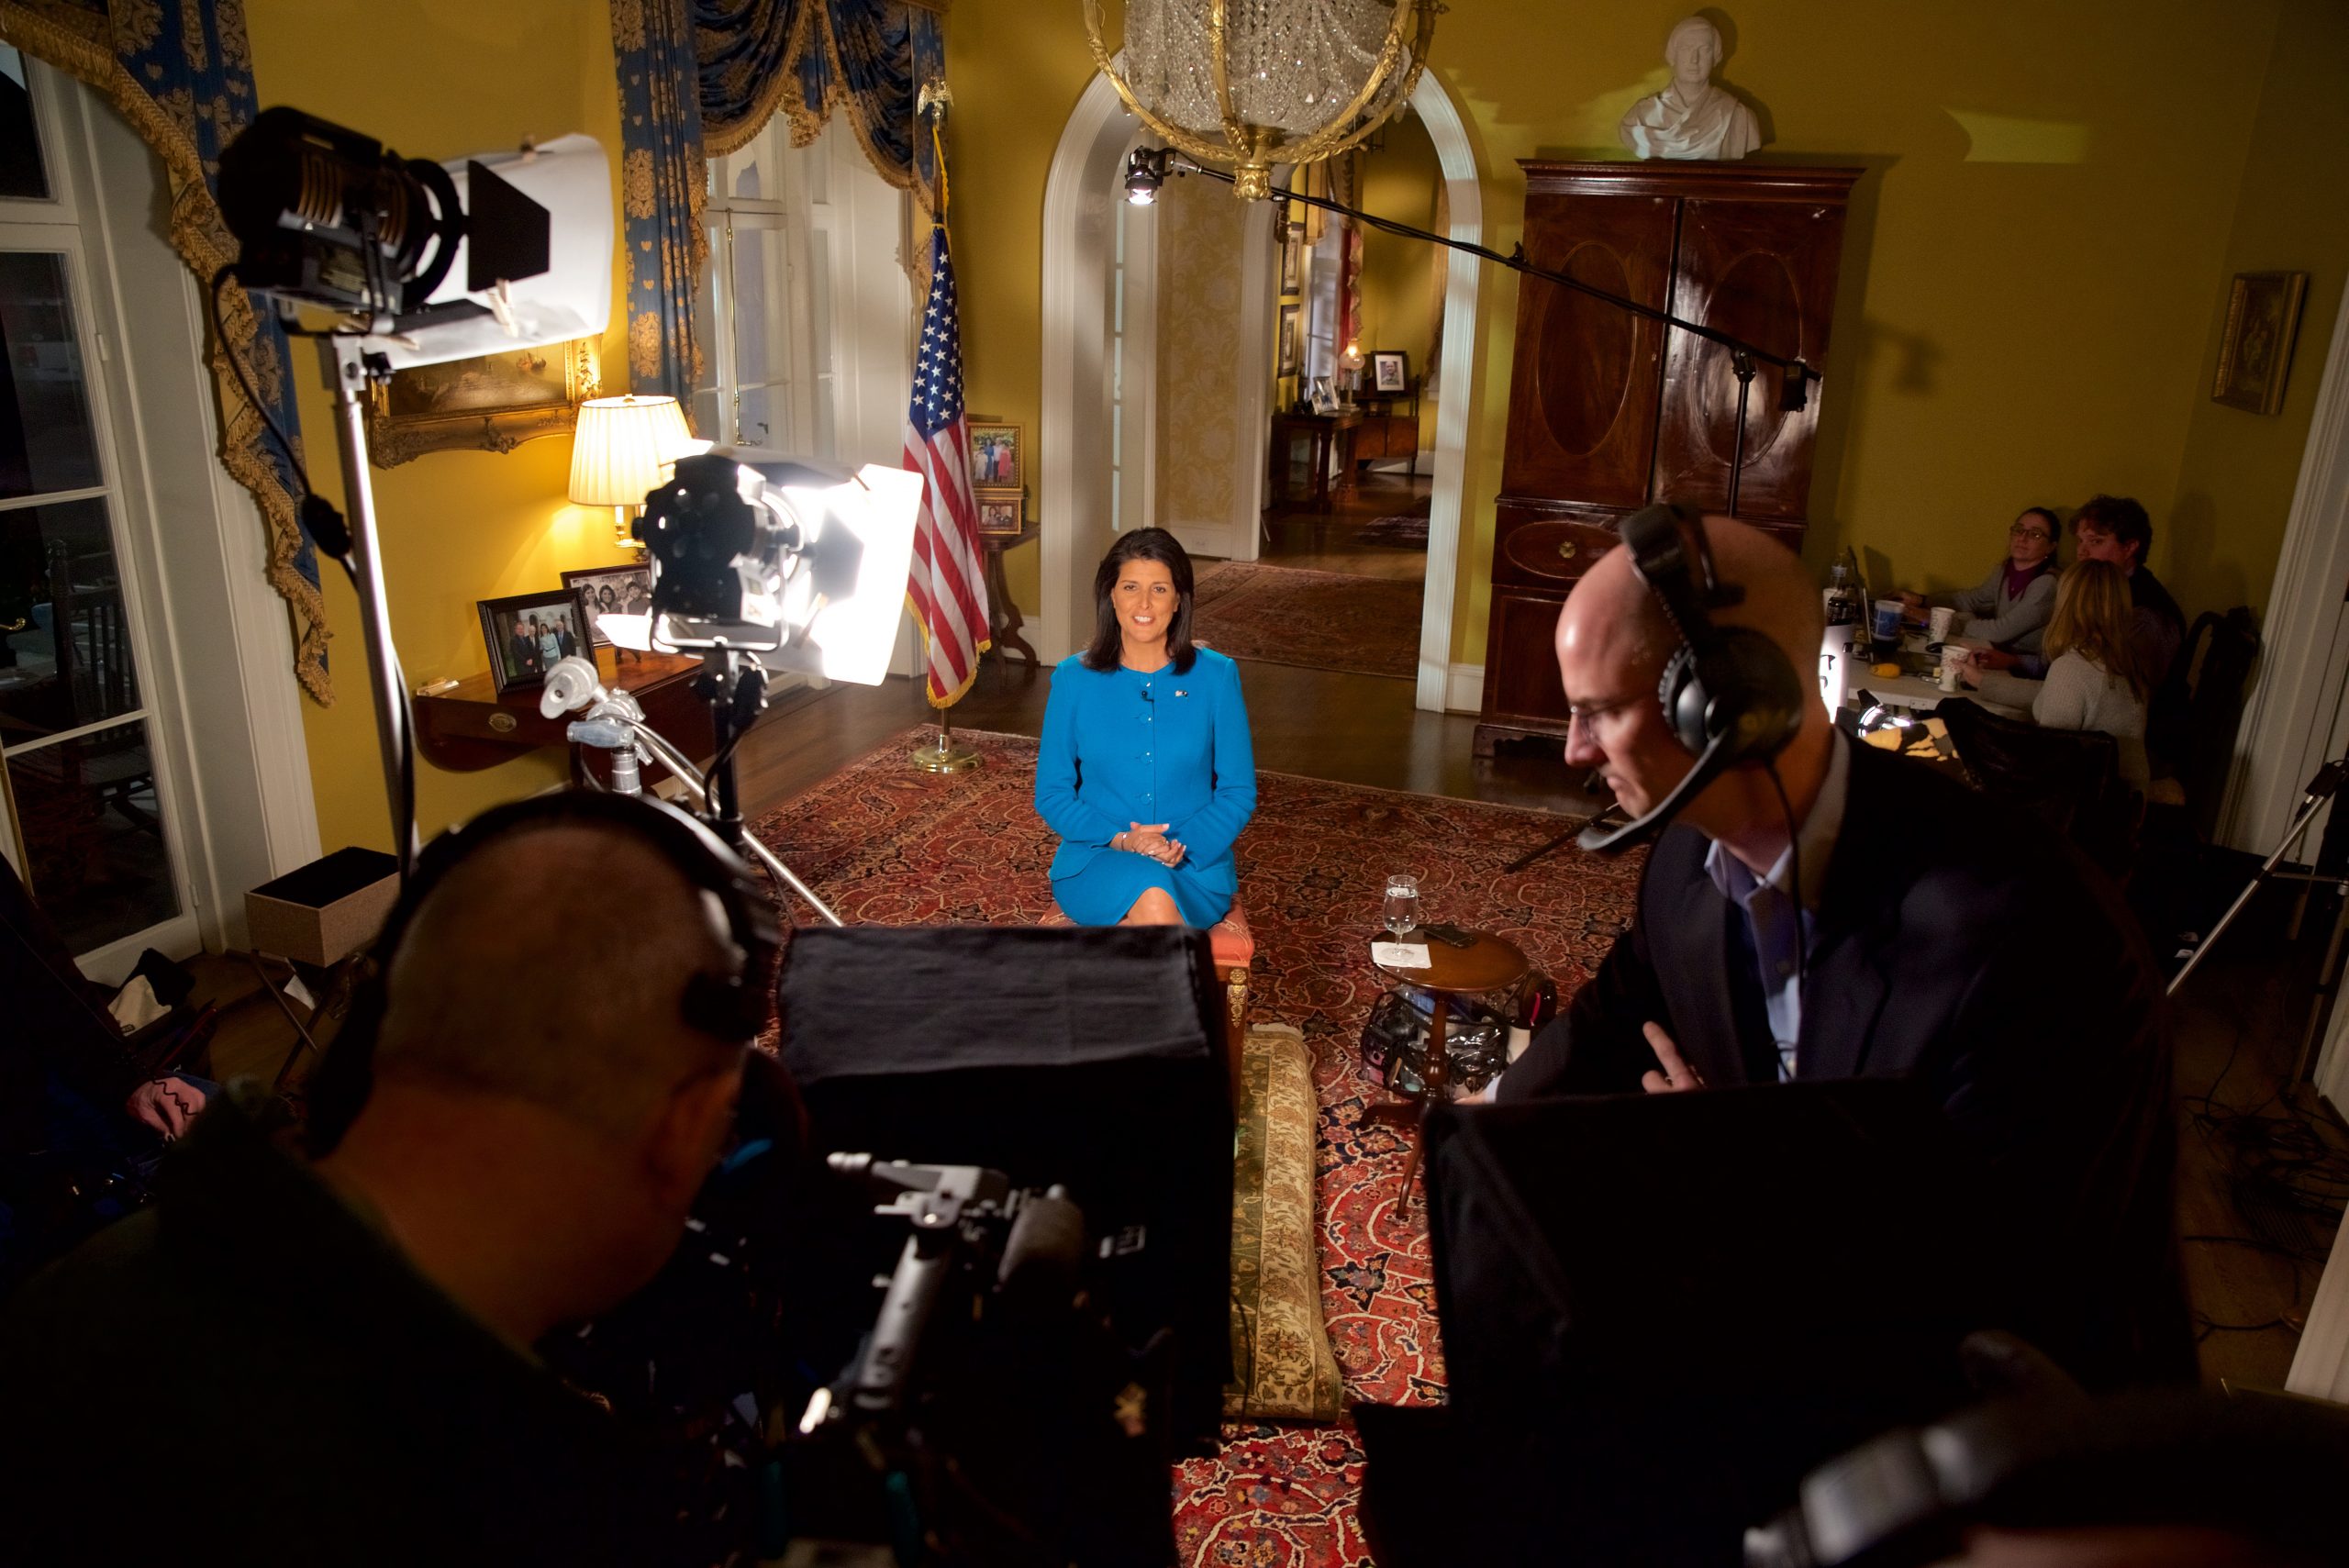 Gov. Nikki Haley delivers the Republican response to President Barack Obama’s final State of the Union address from the South Carolina Governor’s Residence in January 2016. Photography by Sam Holland